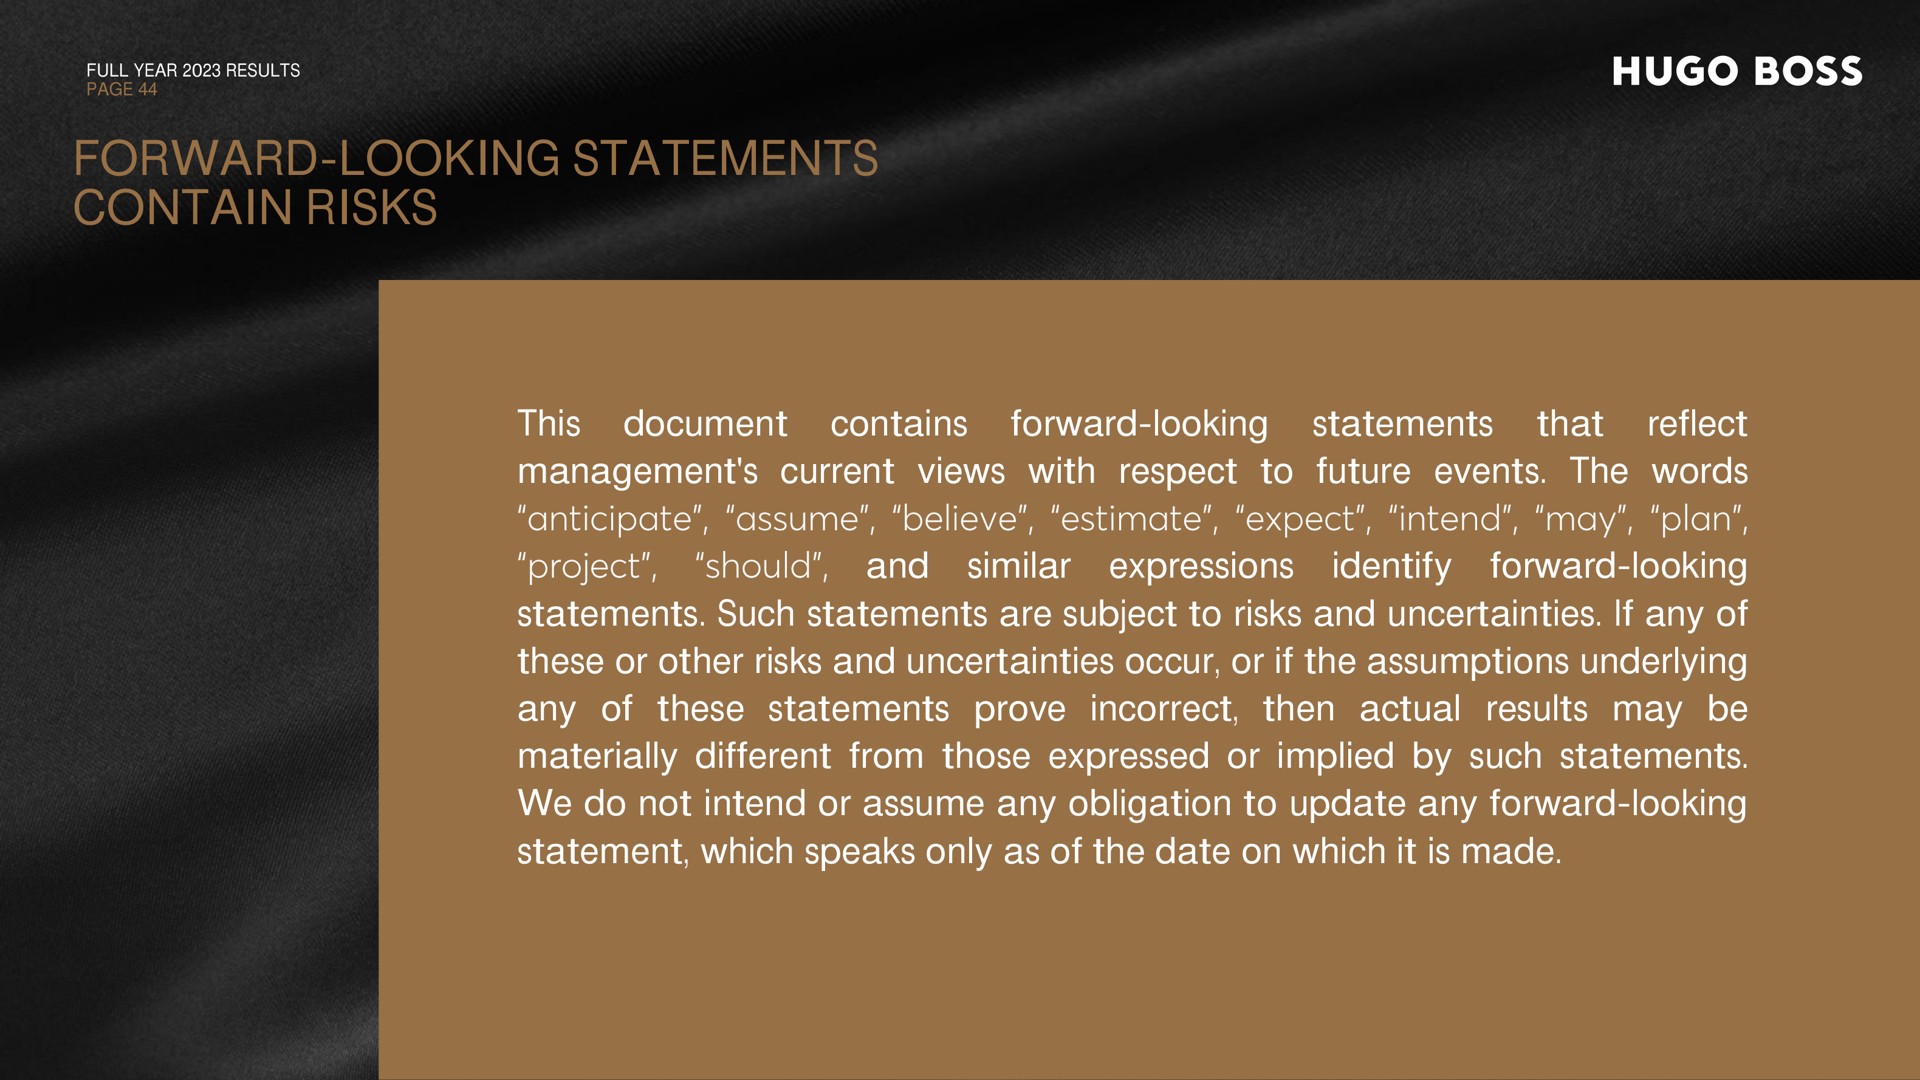 forward looking statements contain risks reflect this document management current views with respect to future events the words forward looking statements contains that identify and similar expressions forward looking statements such statements are subject to risks and uncertainties if any of these or other risks and uncertainties occur or if the assumptions underlying any of these statements prove incorrect then actual results may be materially different from those expressed or implied by such statements we do not intend or assume any obligation to update any forward looking statement which speaks only as of the date on which it is made | Hugo Boss